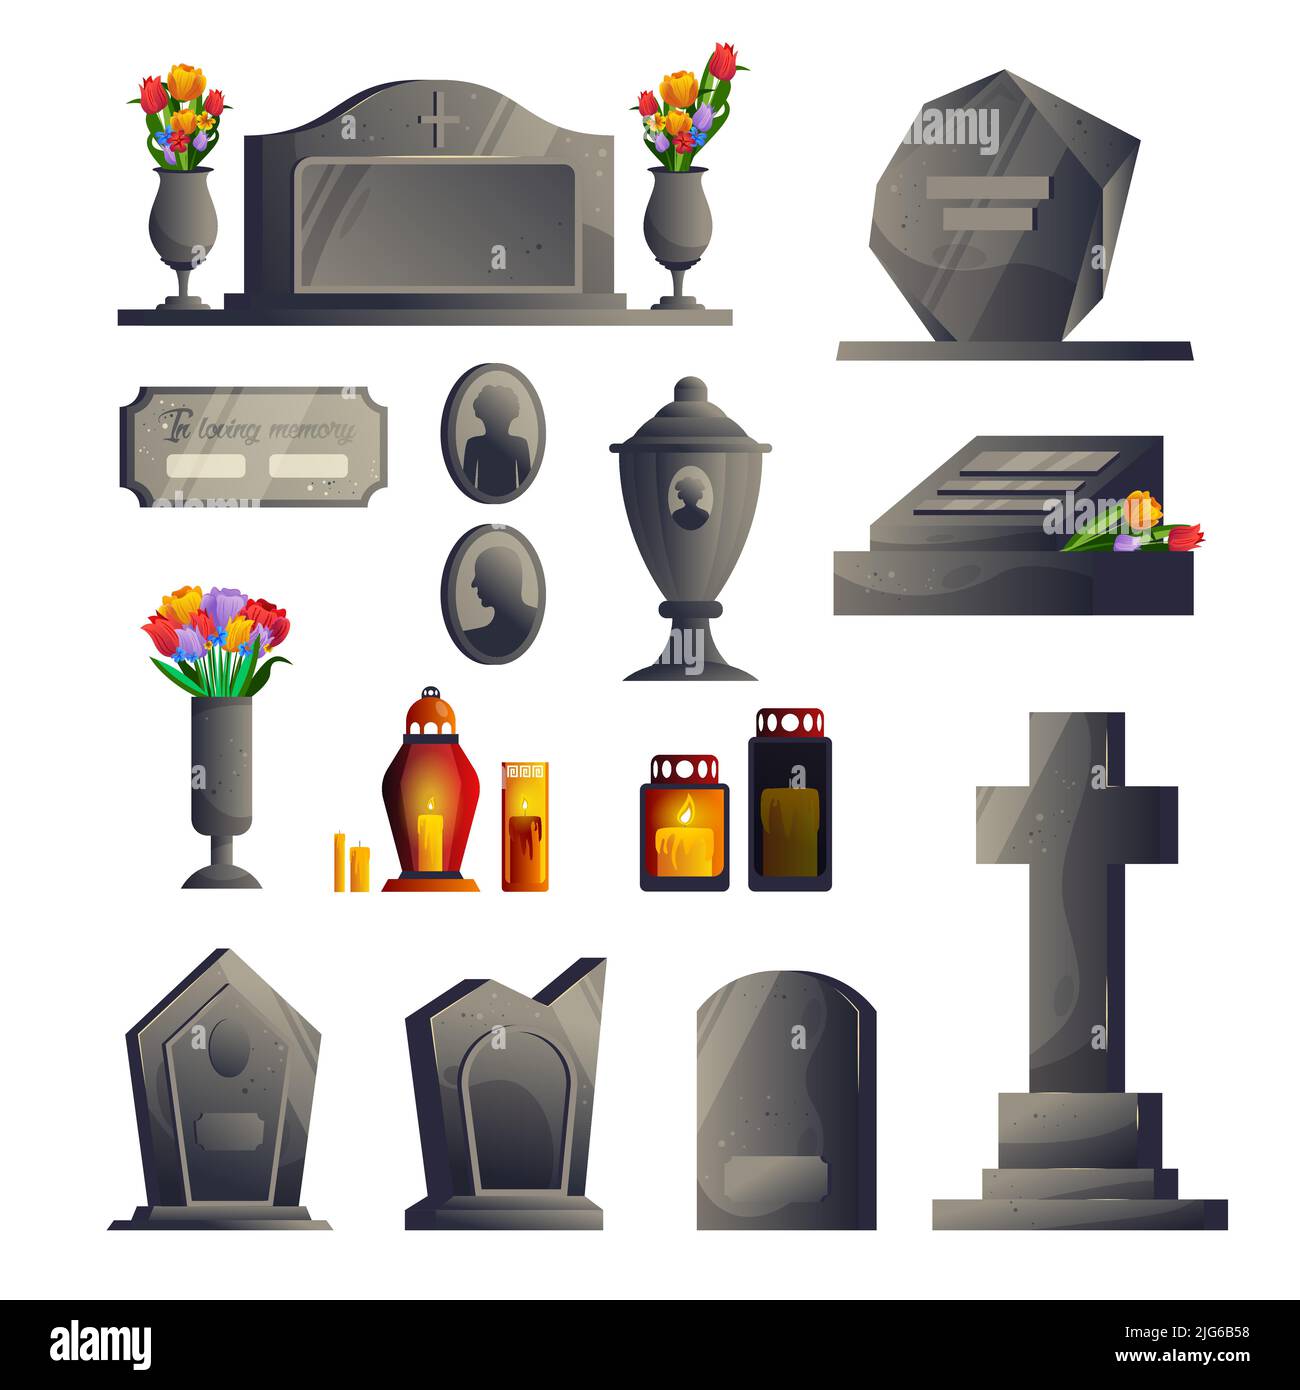 Cemetery gravestone modern icon set gray gravestones of different sizes and shapes with and without flower beds and candlesticks vector illustration Stock Vector